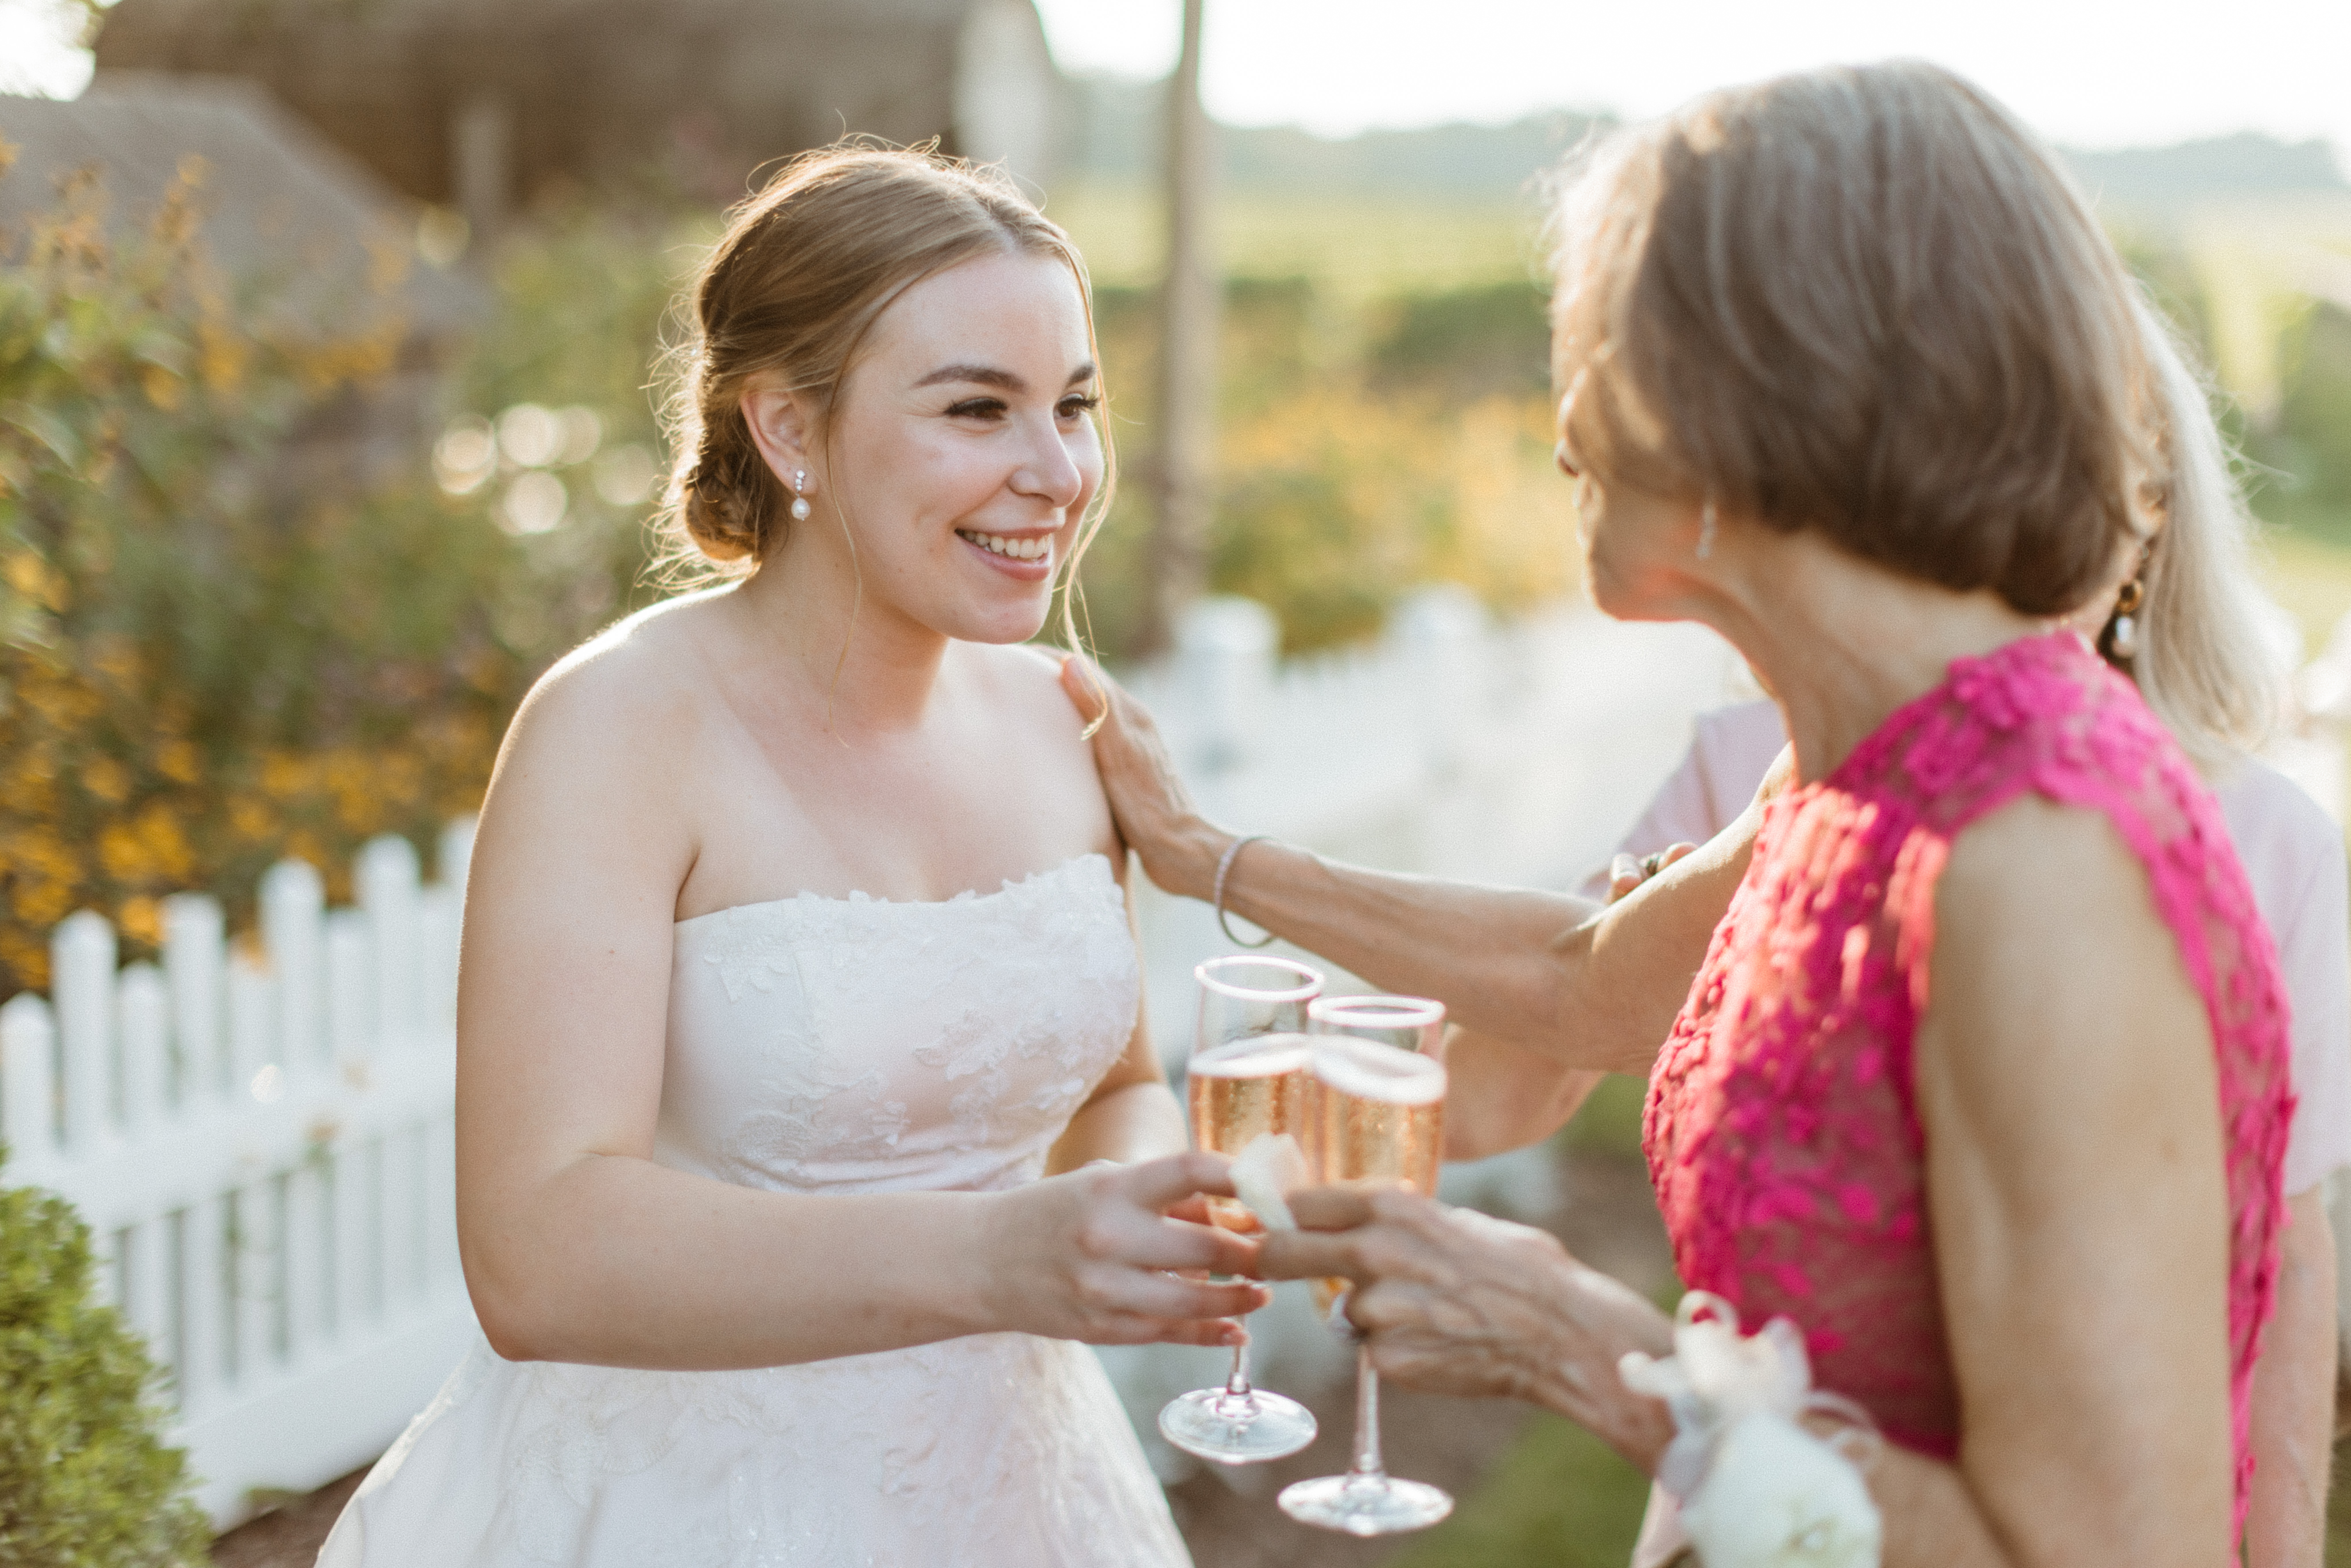 Bride embraces a guest sharing a toast during her stunning Bedell winery wedding reception